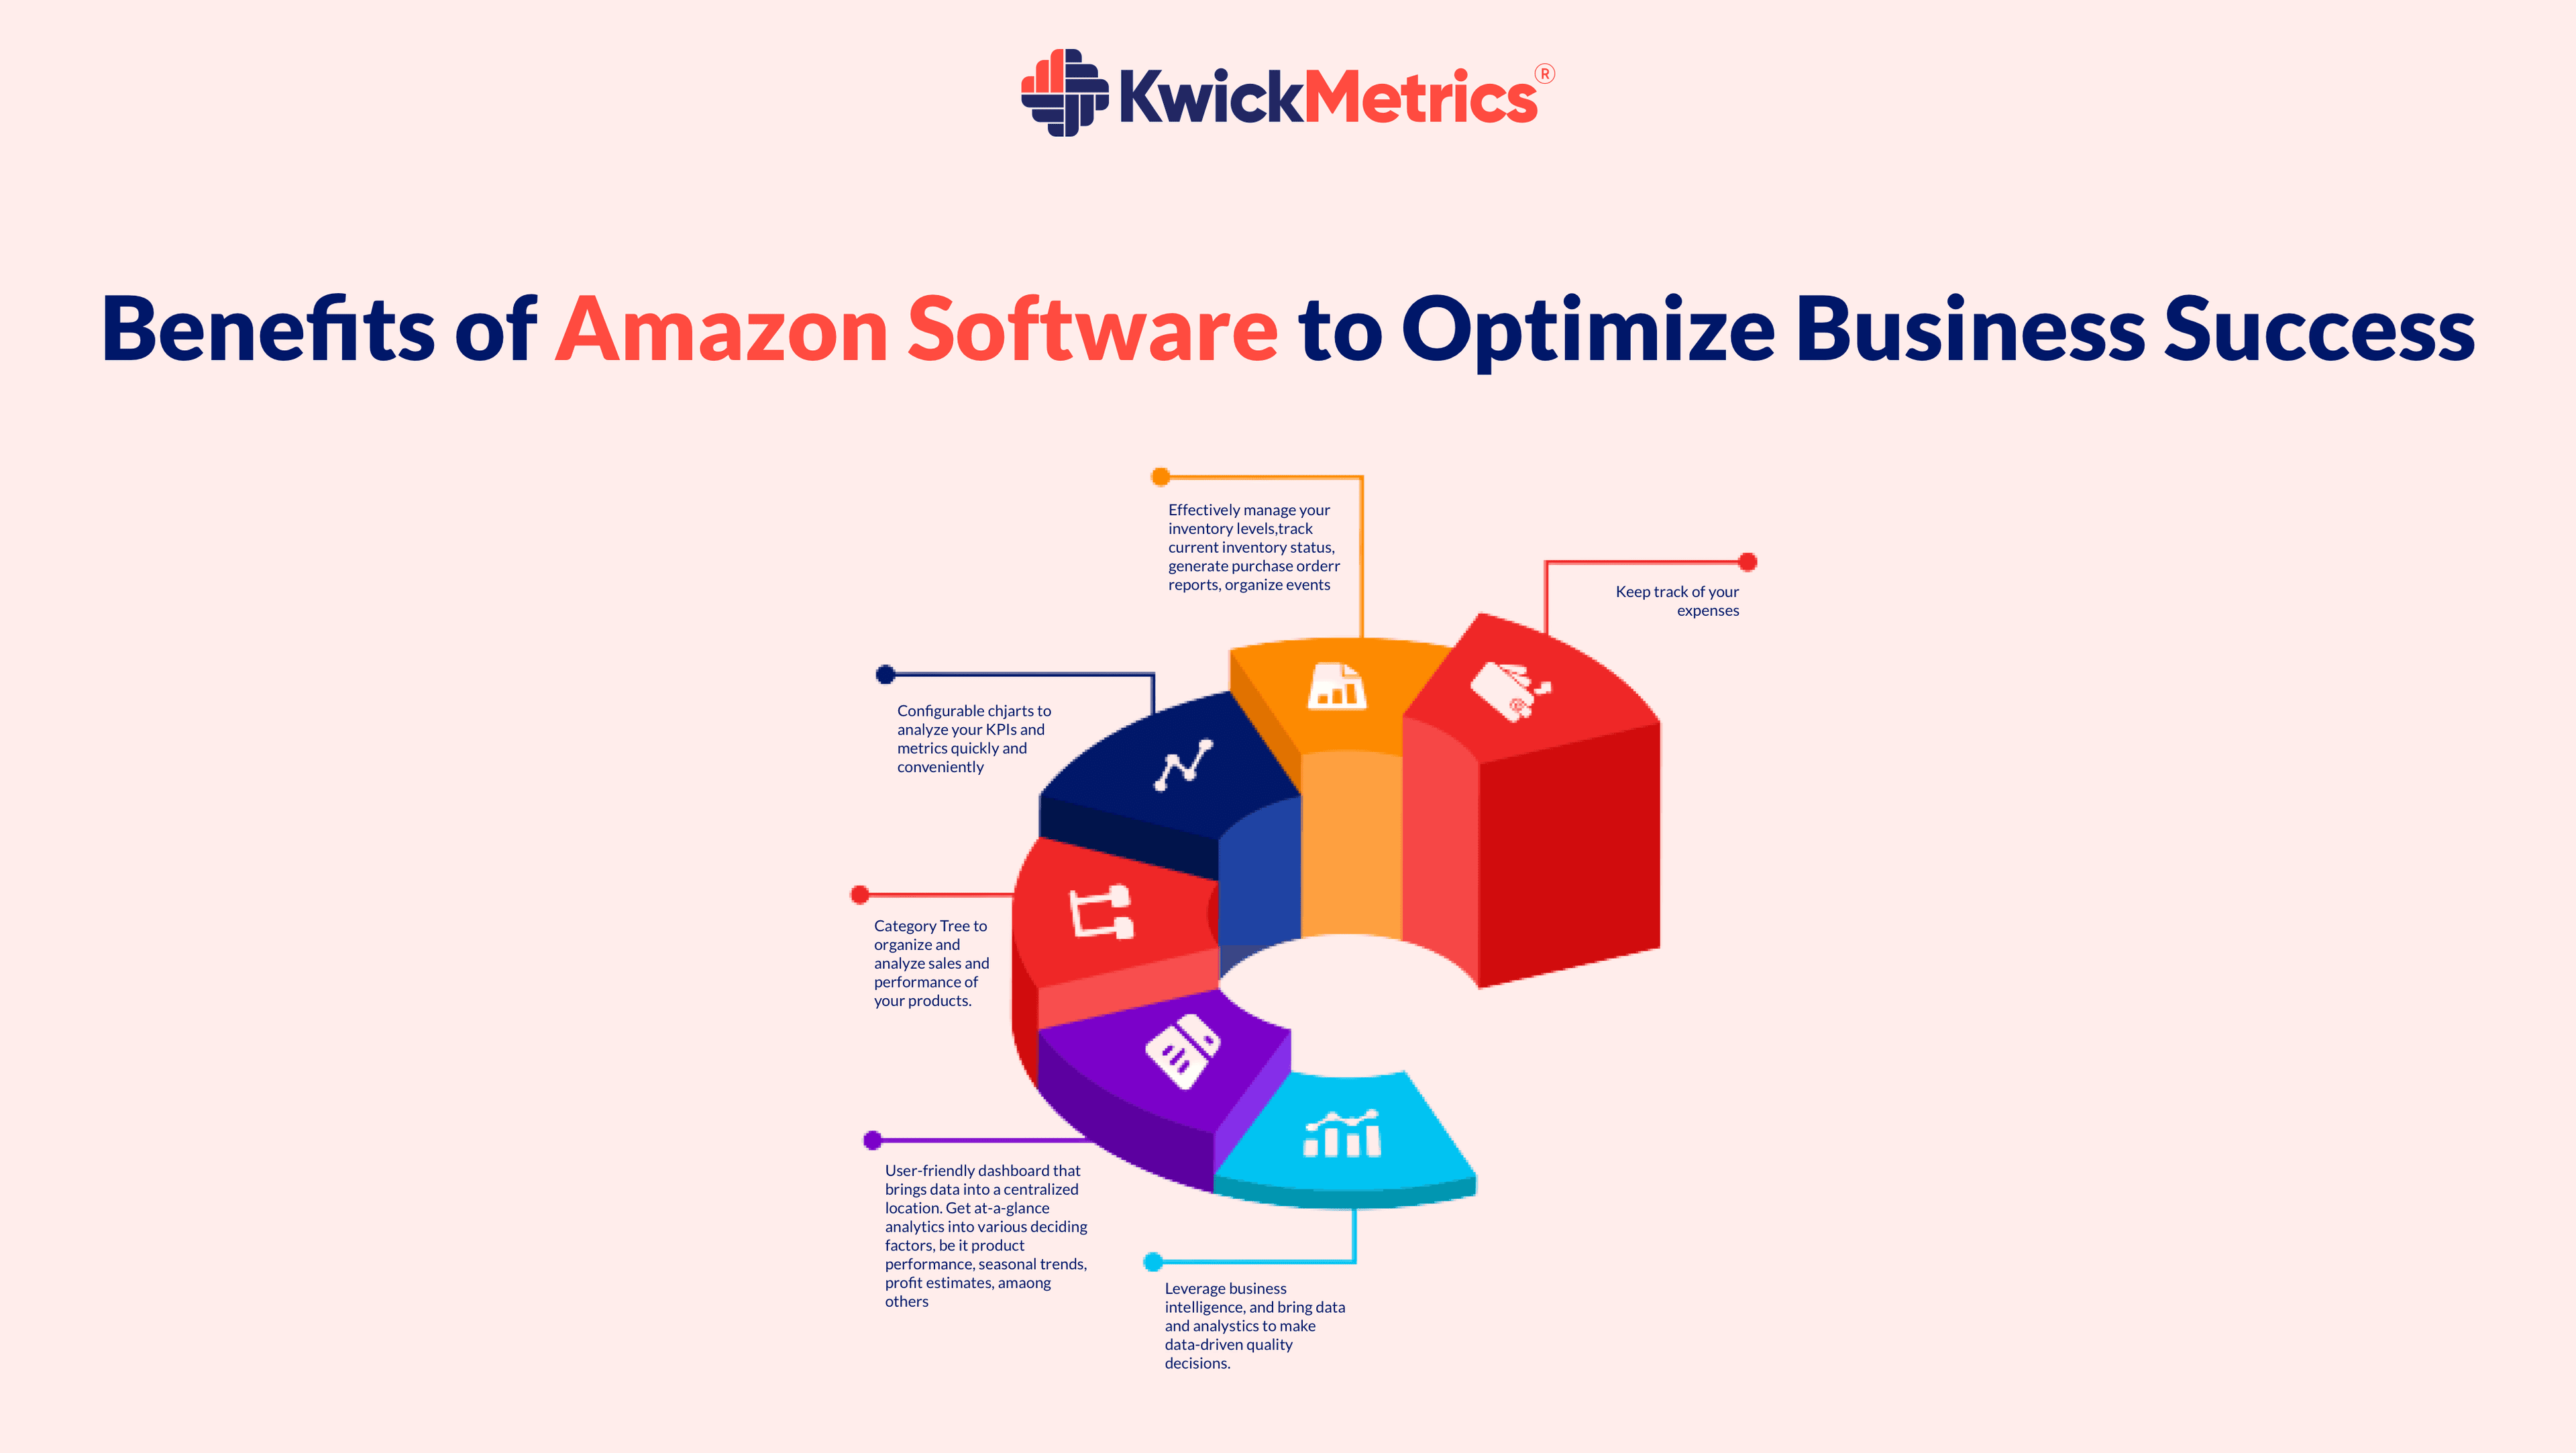 Benefits of Amazon Software to Optimize Business Success